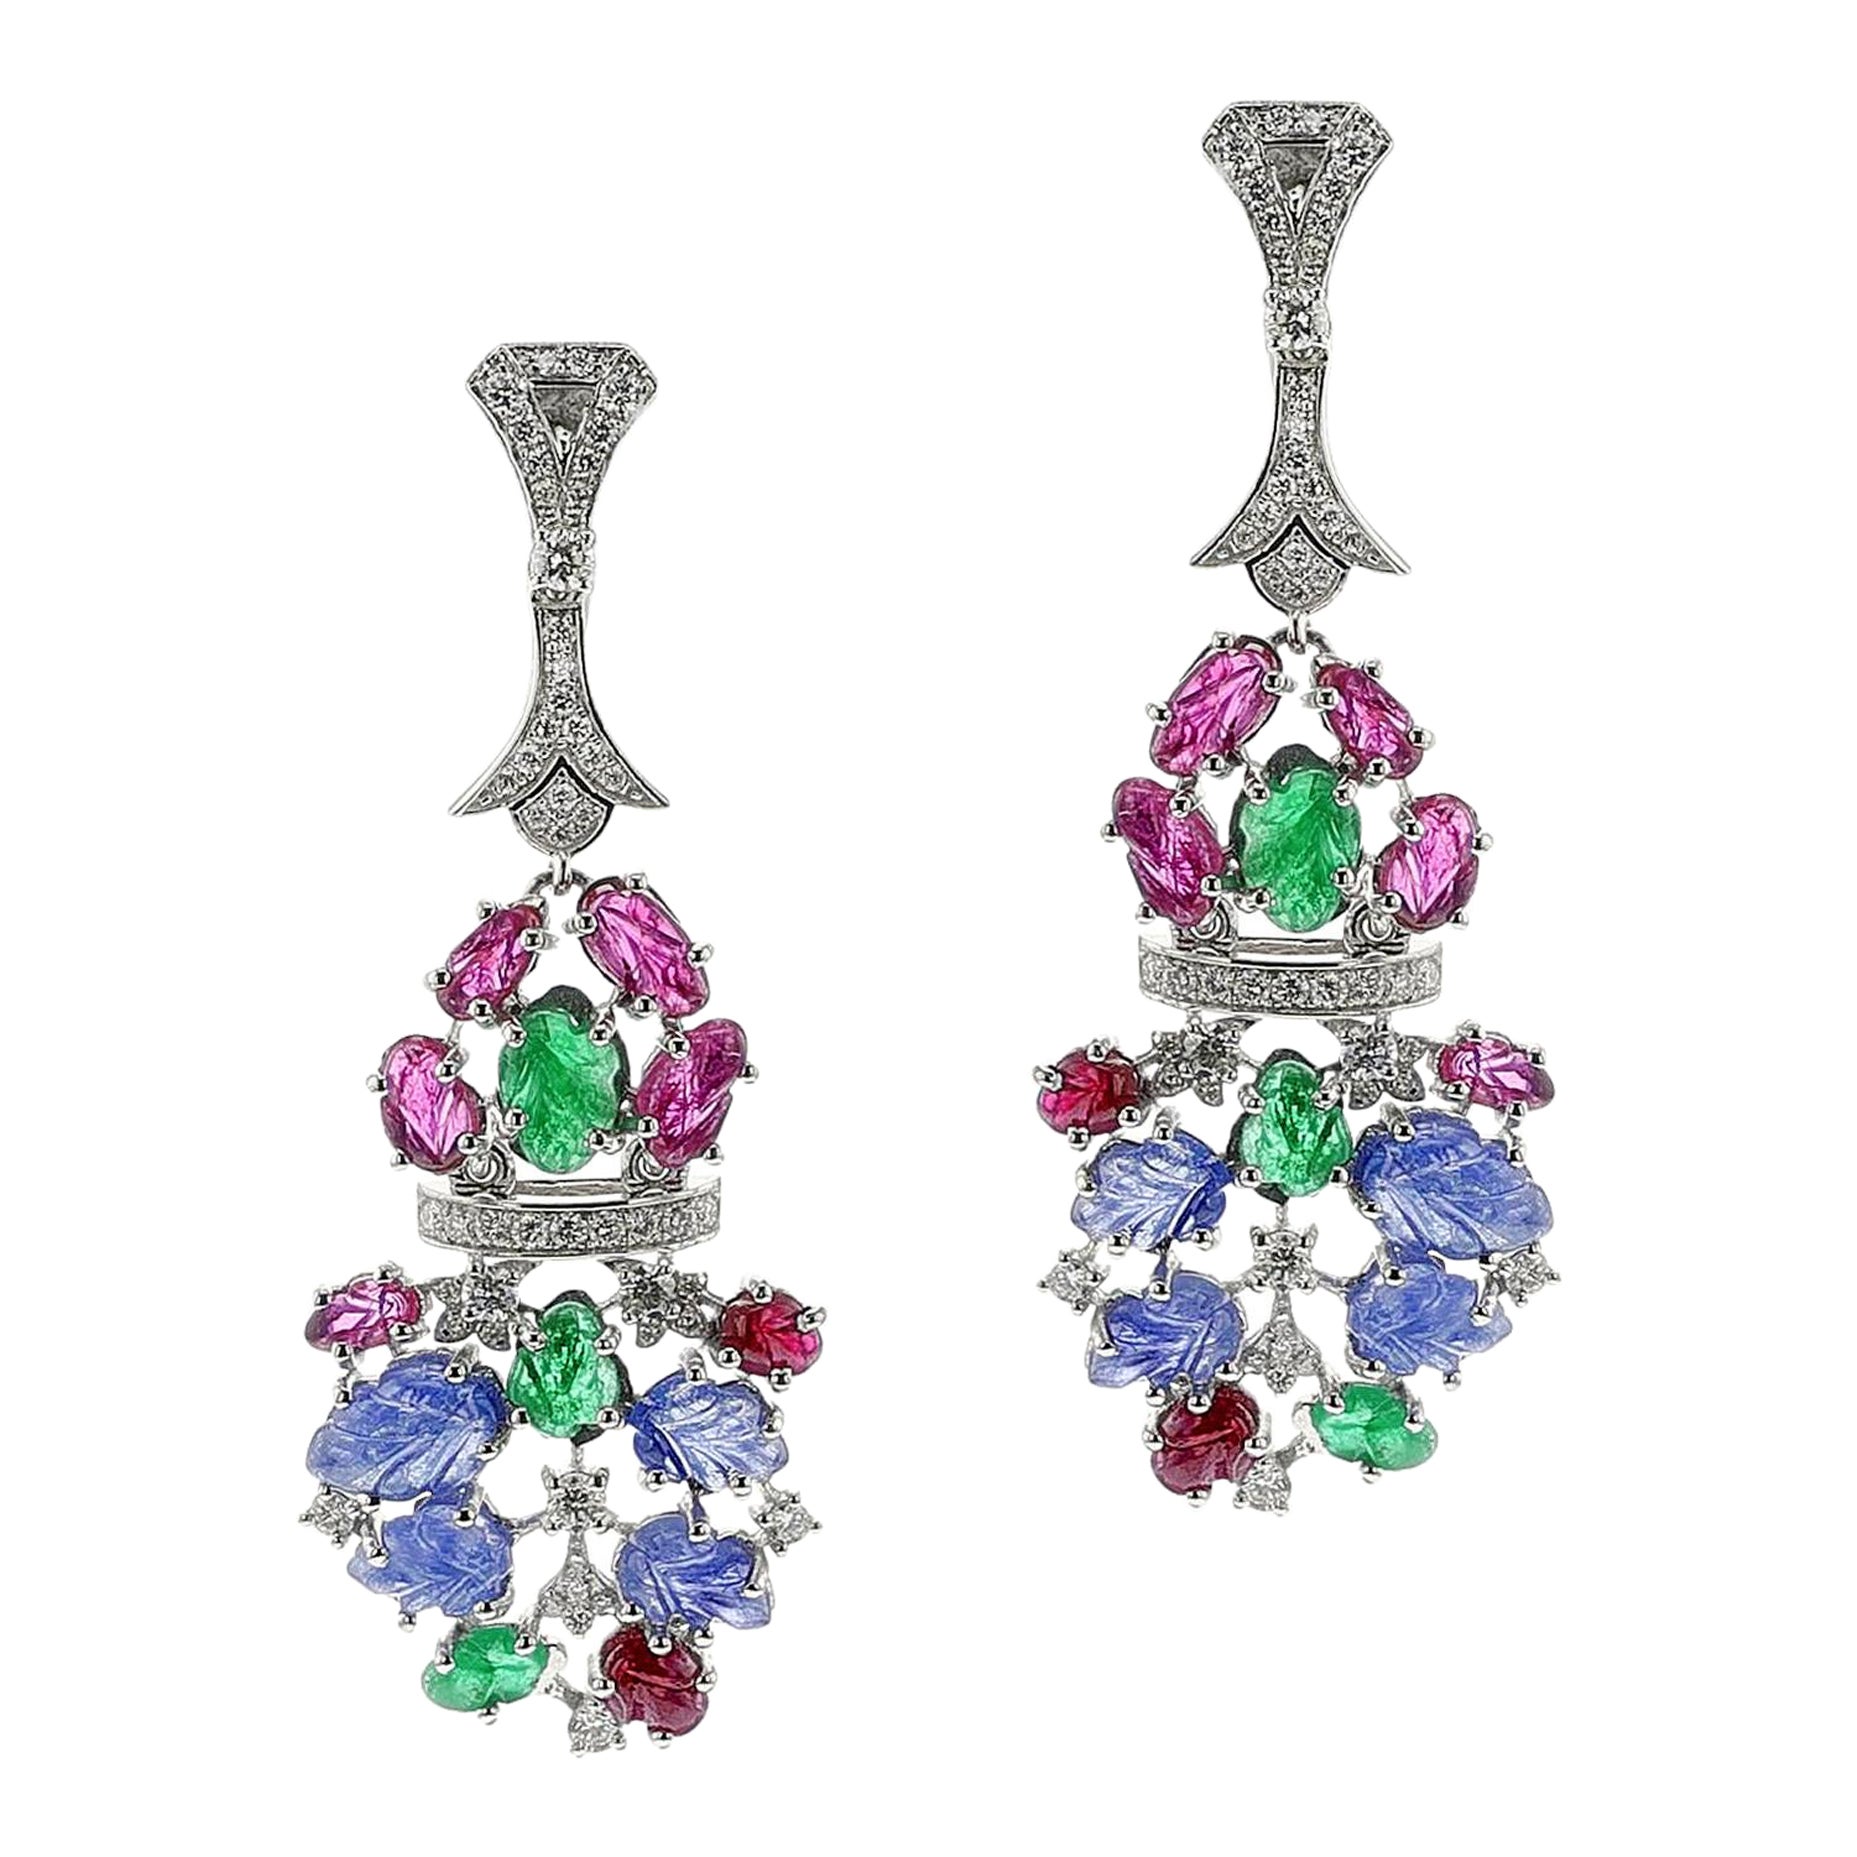 Carved Ruby, Emerald, Sapphire and Diamond Dangling Earrings, 18k